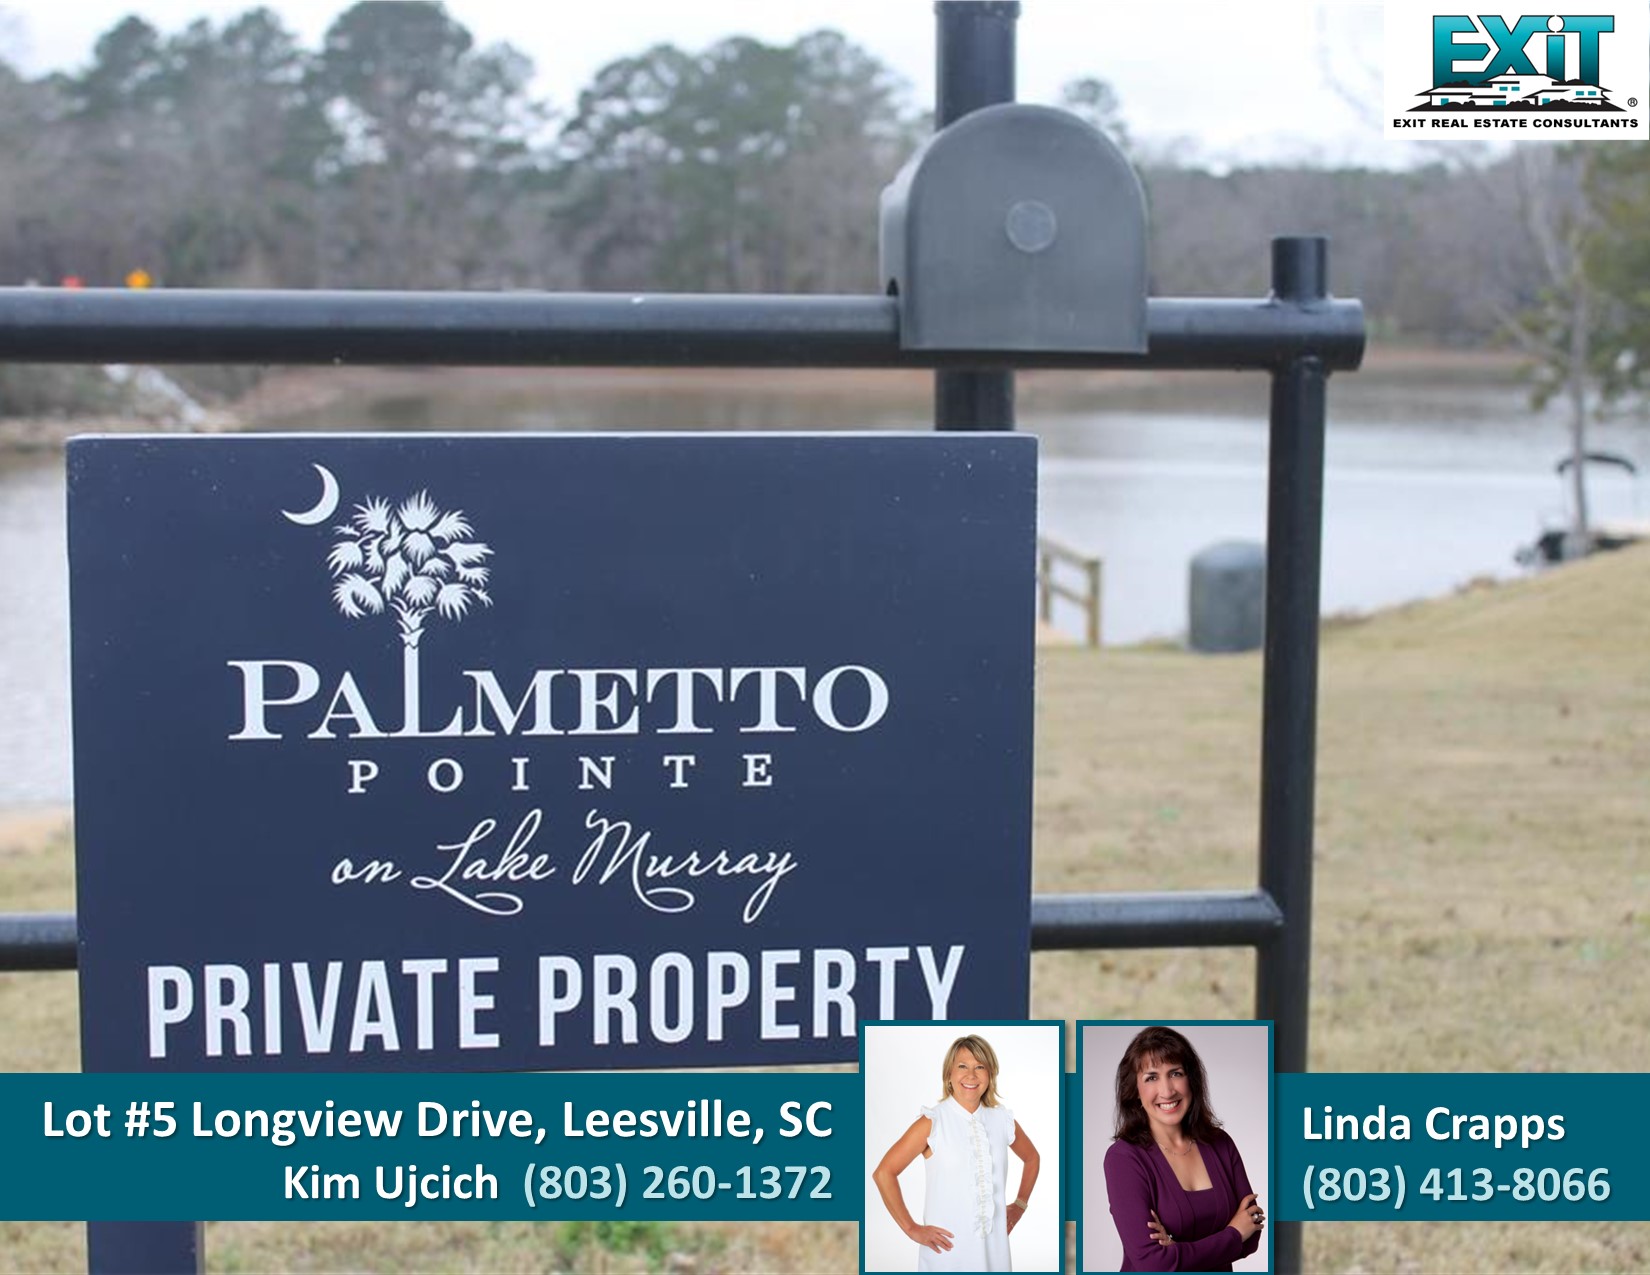 Just listed in Palmetto Pointe - Leesville